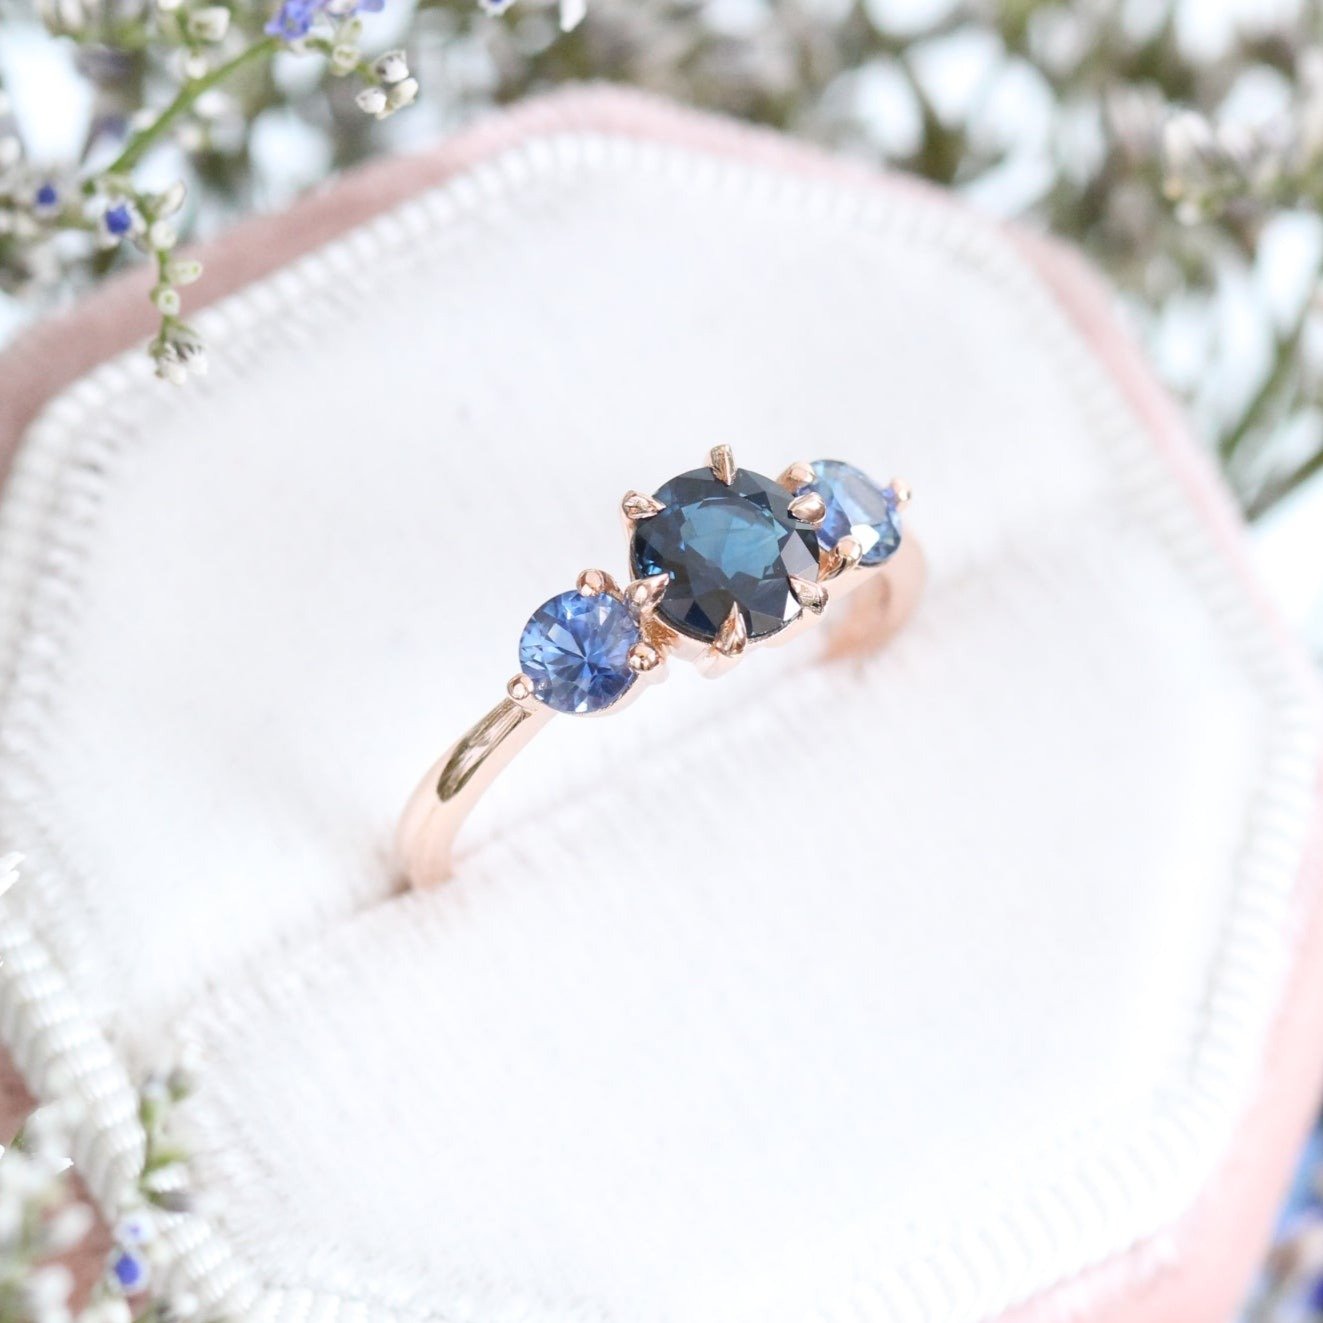 Round Blue Sapphire Engagement Ring in Rose Gold 3 Stone Ring by La More Design Jewelry